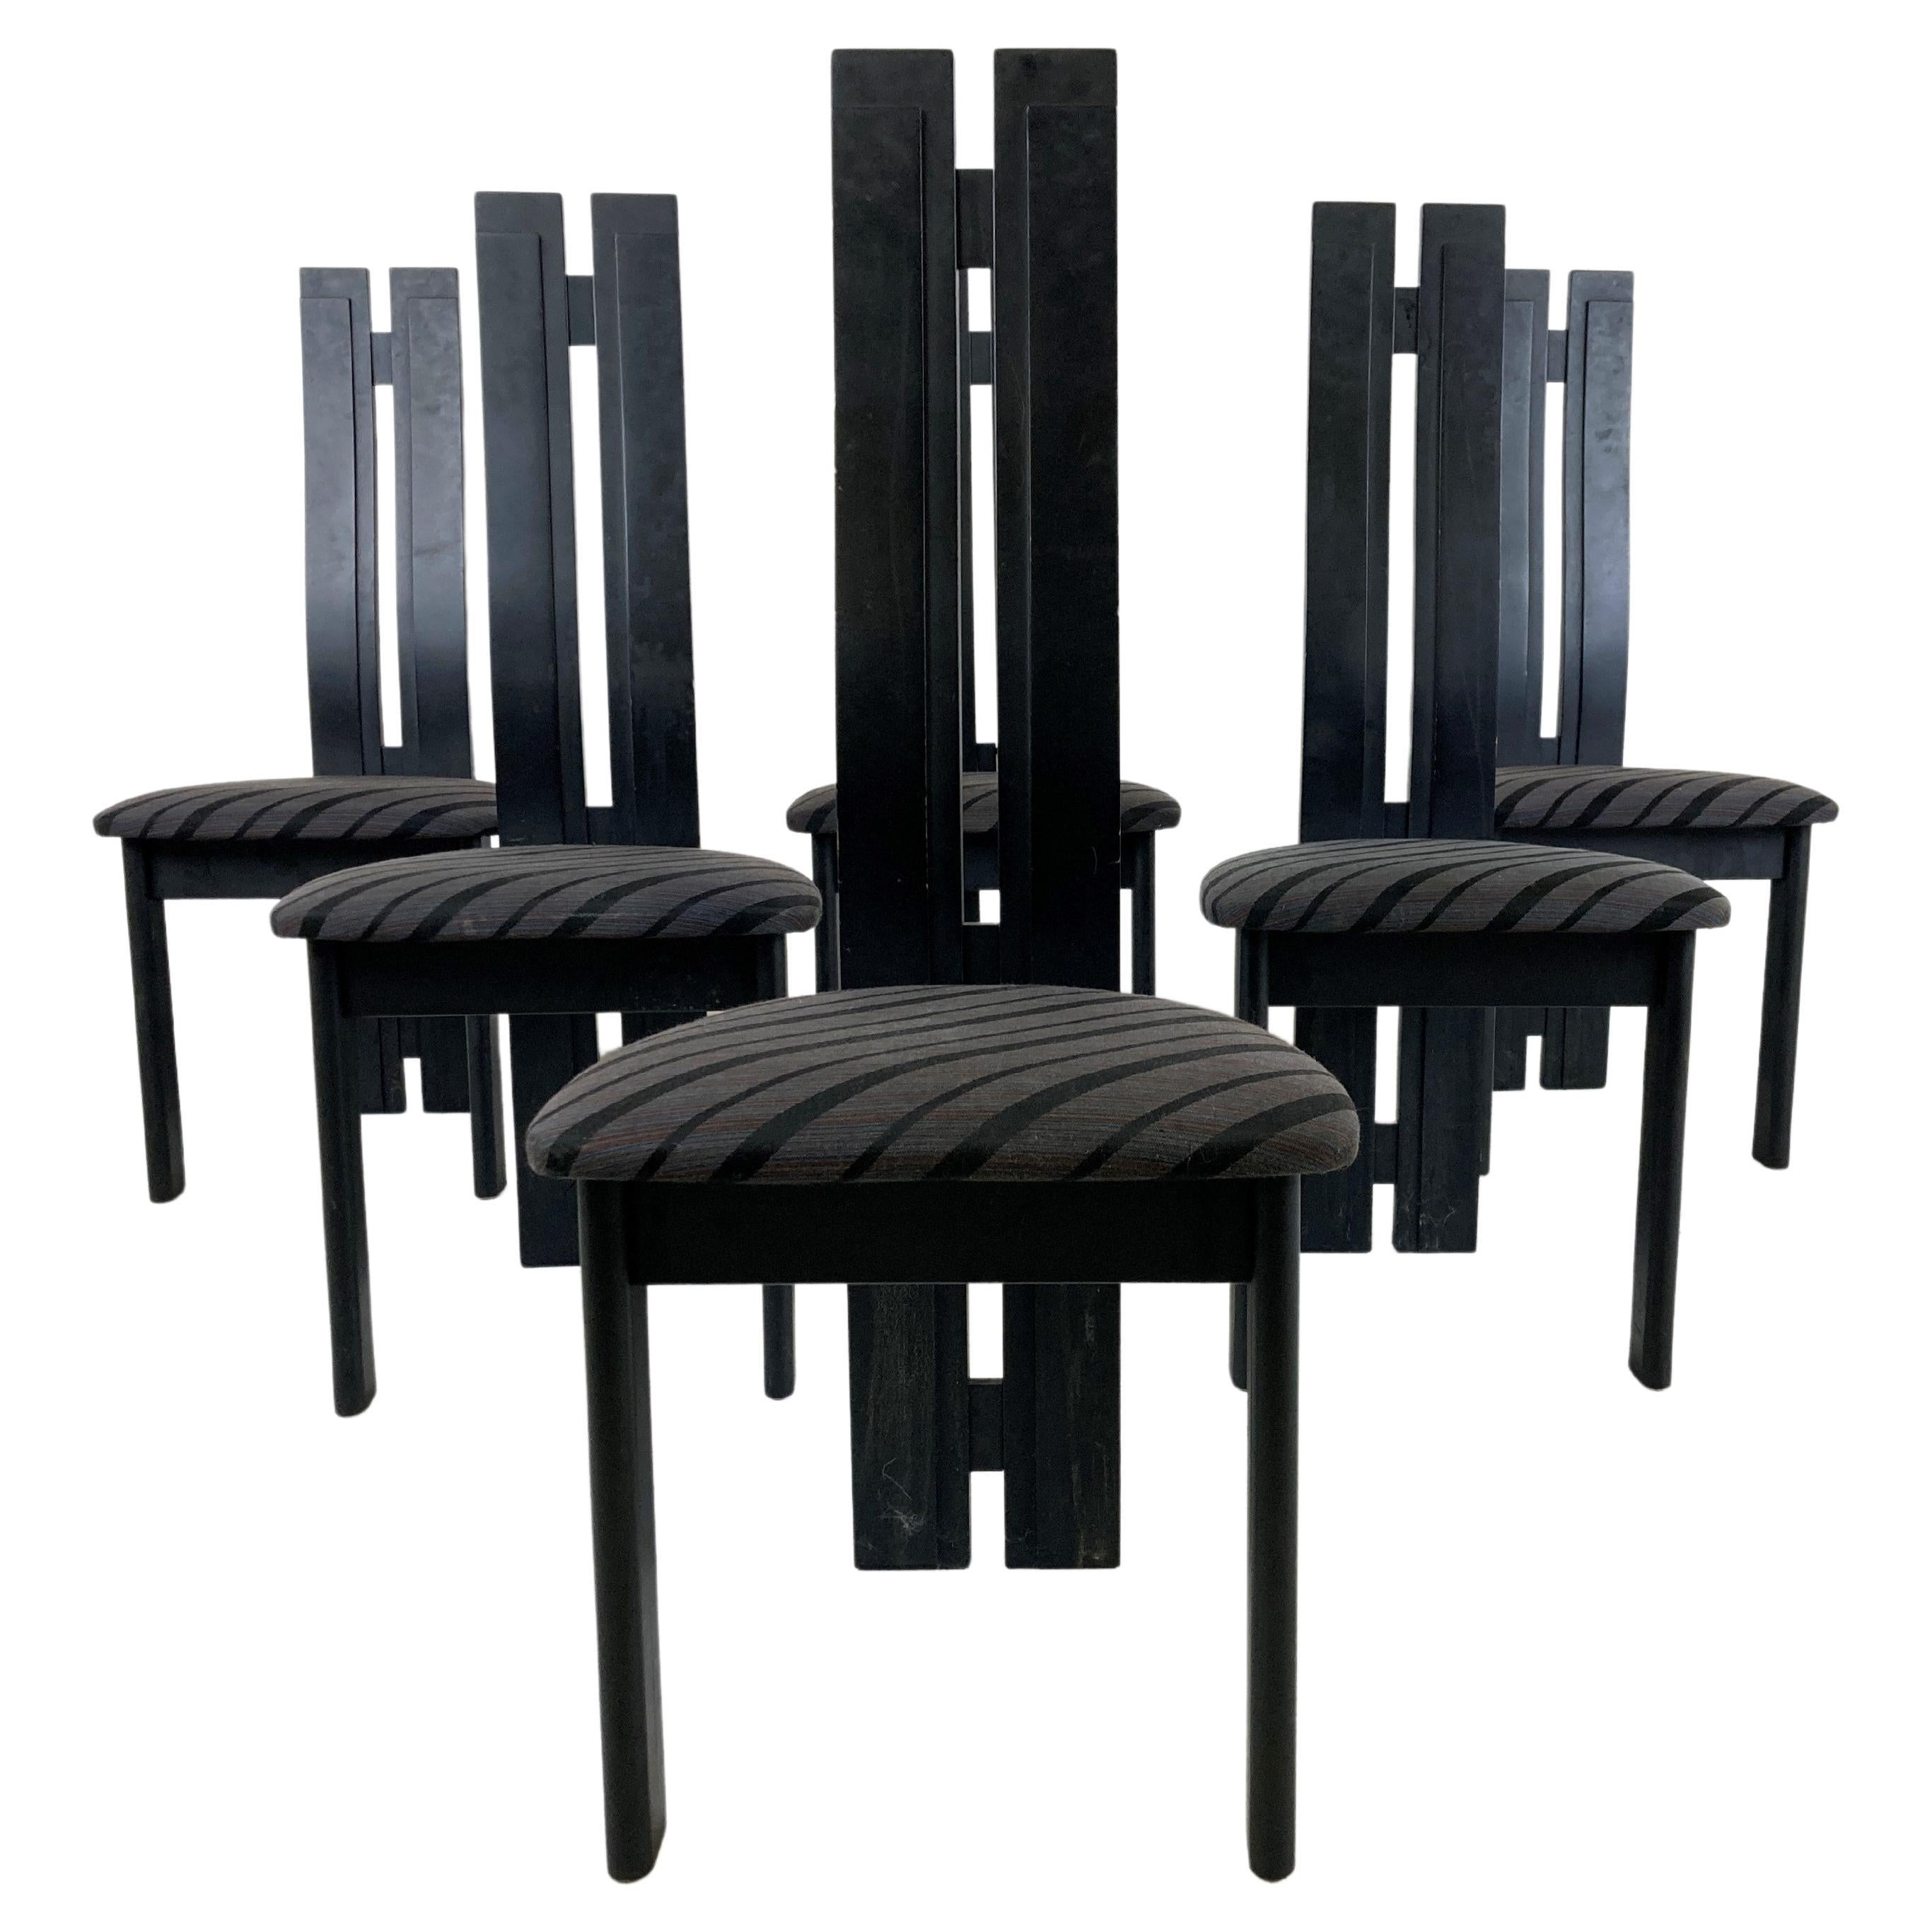 Set of 6 Black Wooden High Back Dining Chairs, 1980s For Sale